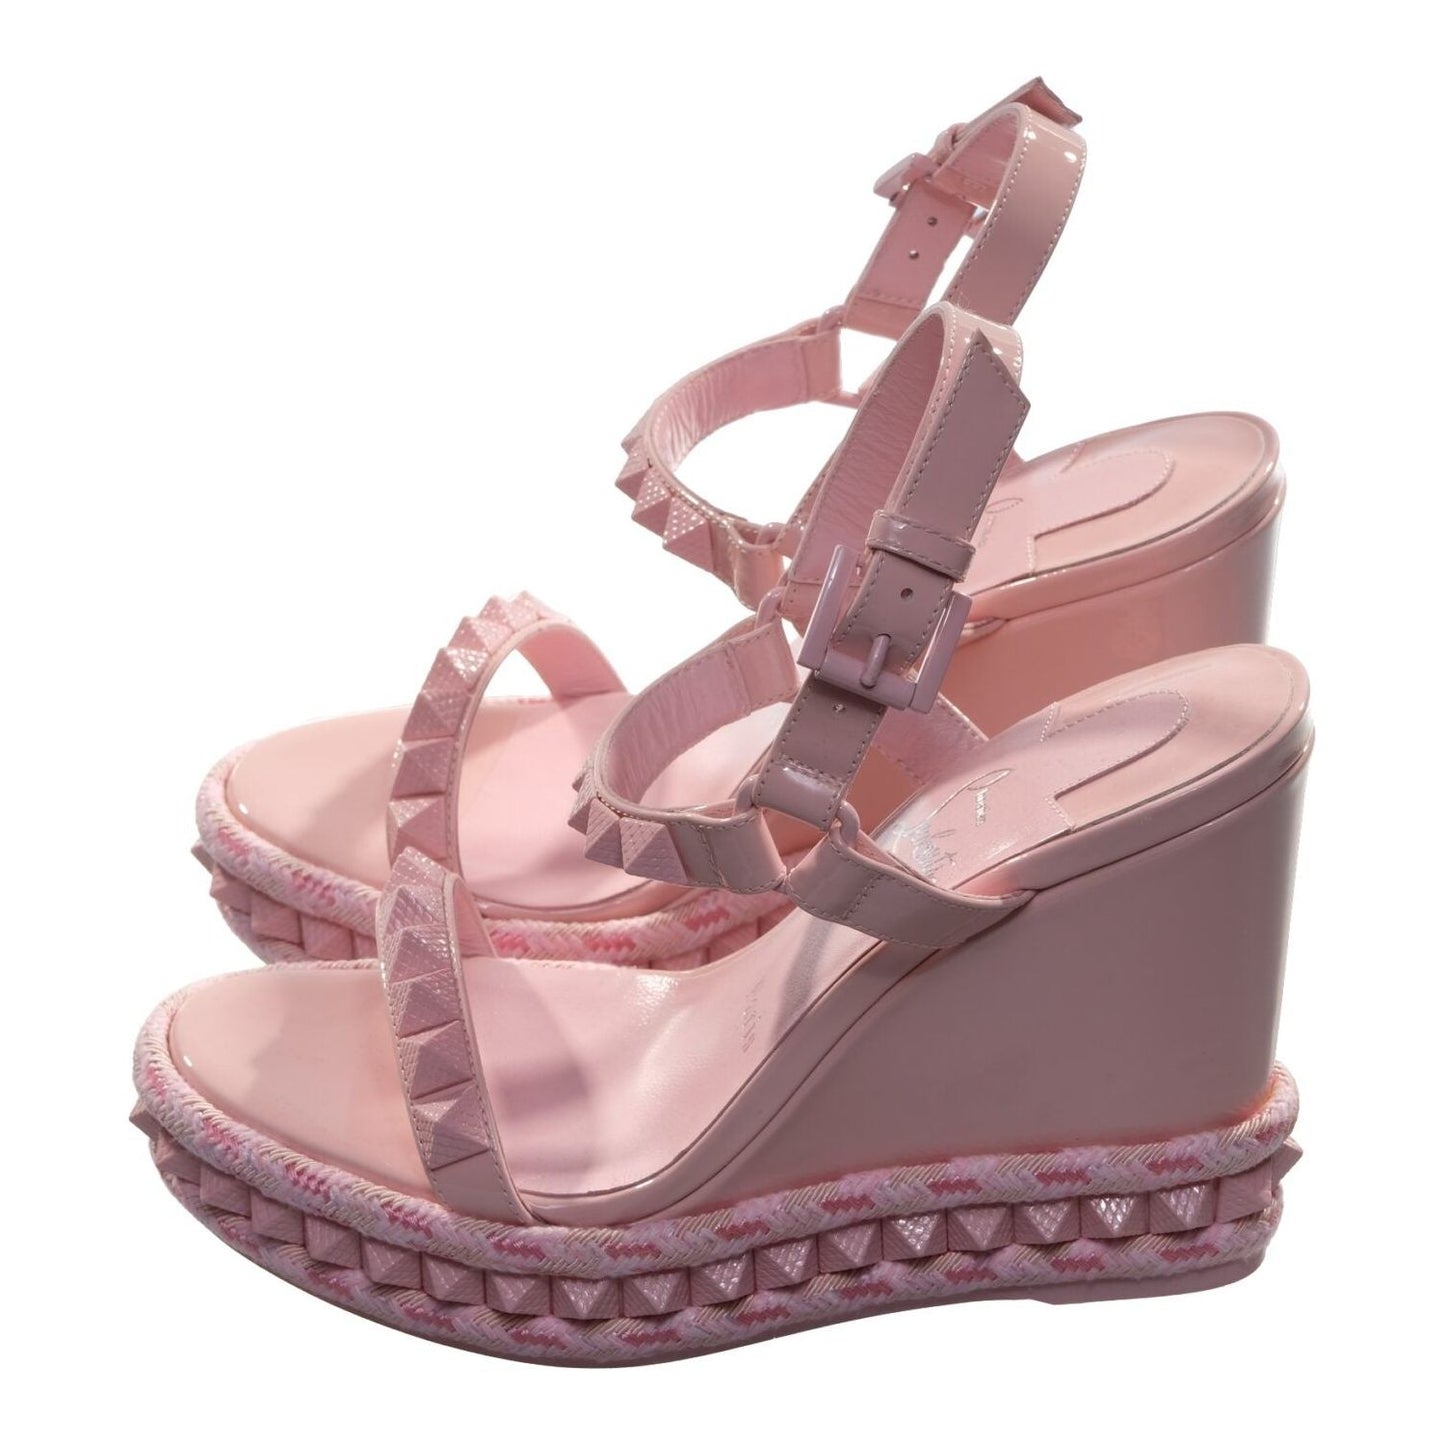 Christian Louboutin Pyraclou 100 Rosy Pink Studded Patent Leather High Heel Wedge Sandals pyraclou-100-rosy-pink-studded-patent-leather-high-heel-wedge-sandals